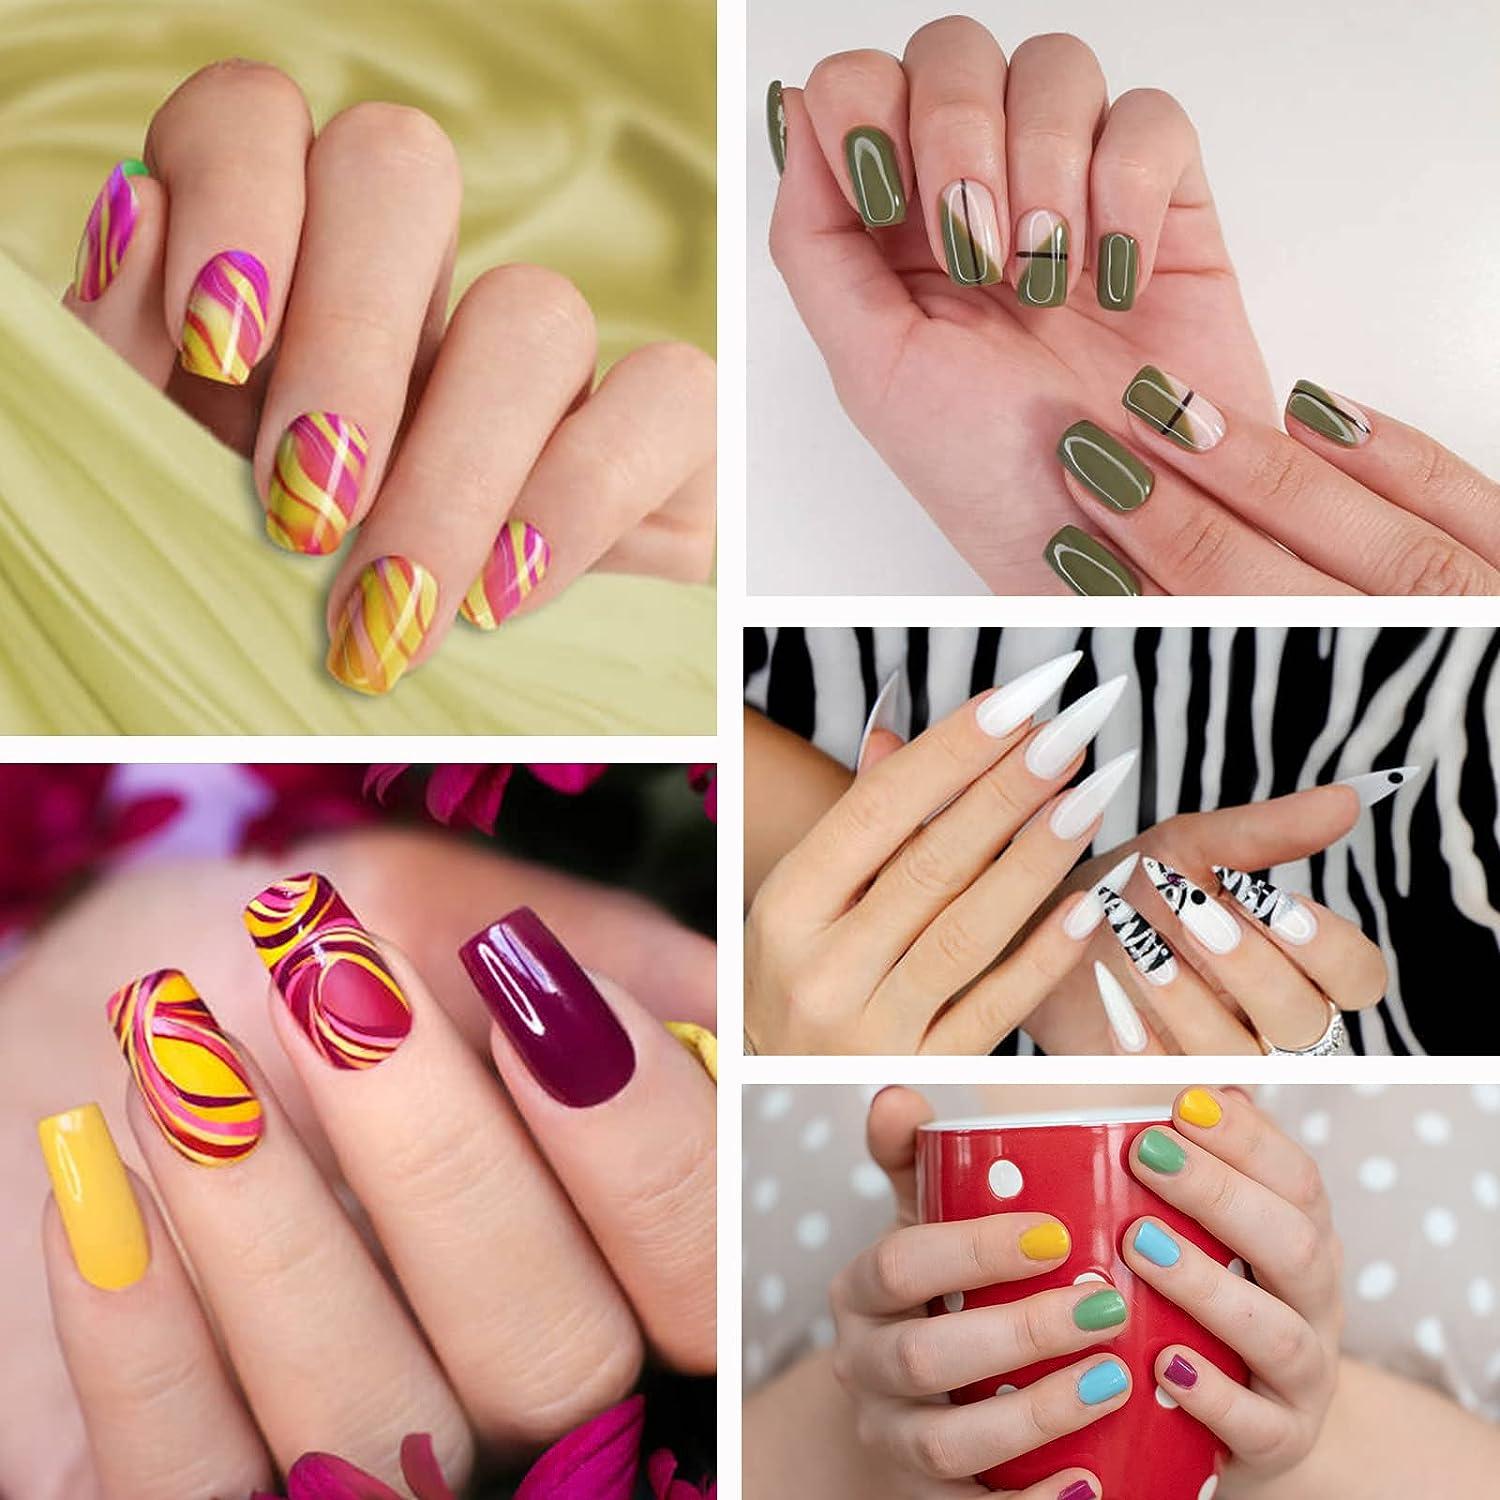 Fashionable 3D nail decorations - how to do it?